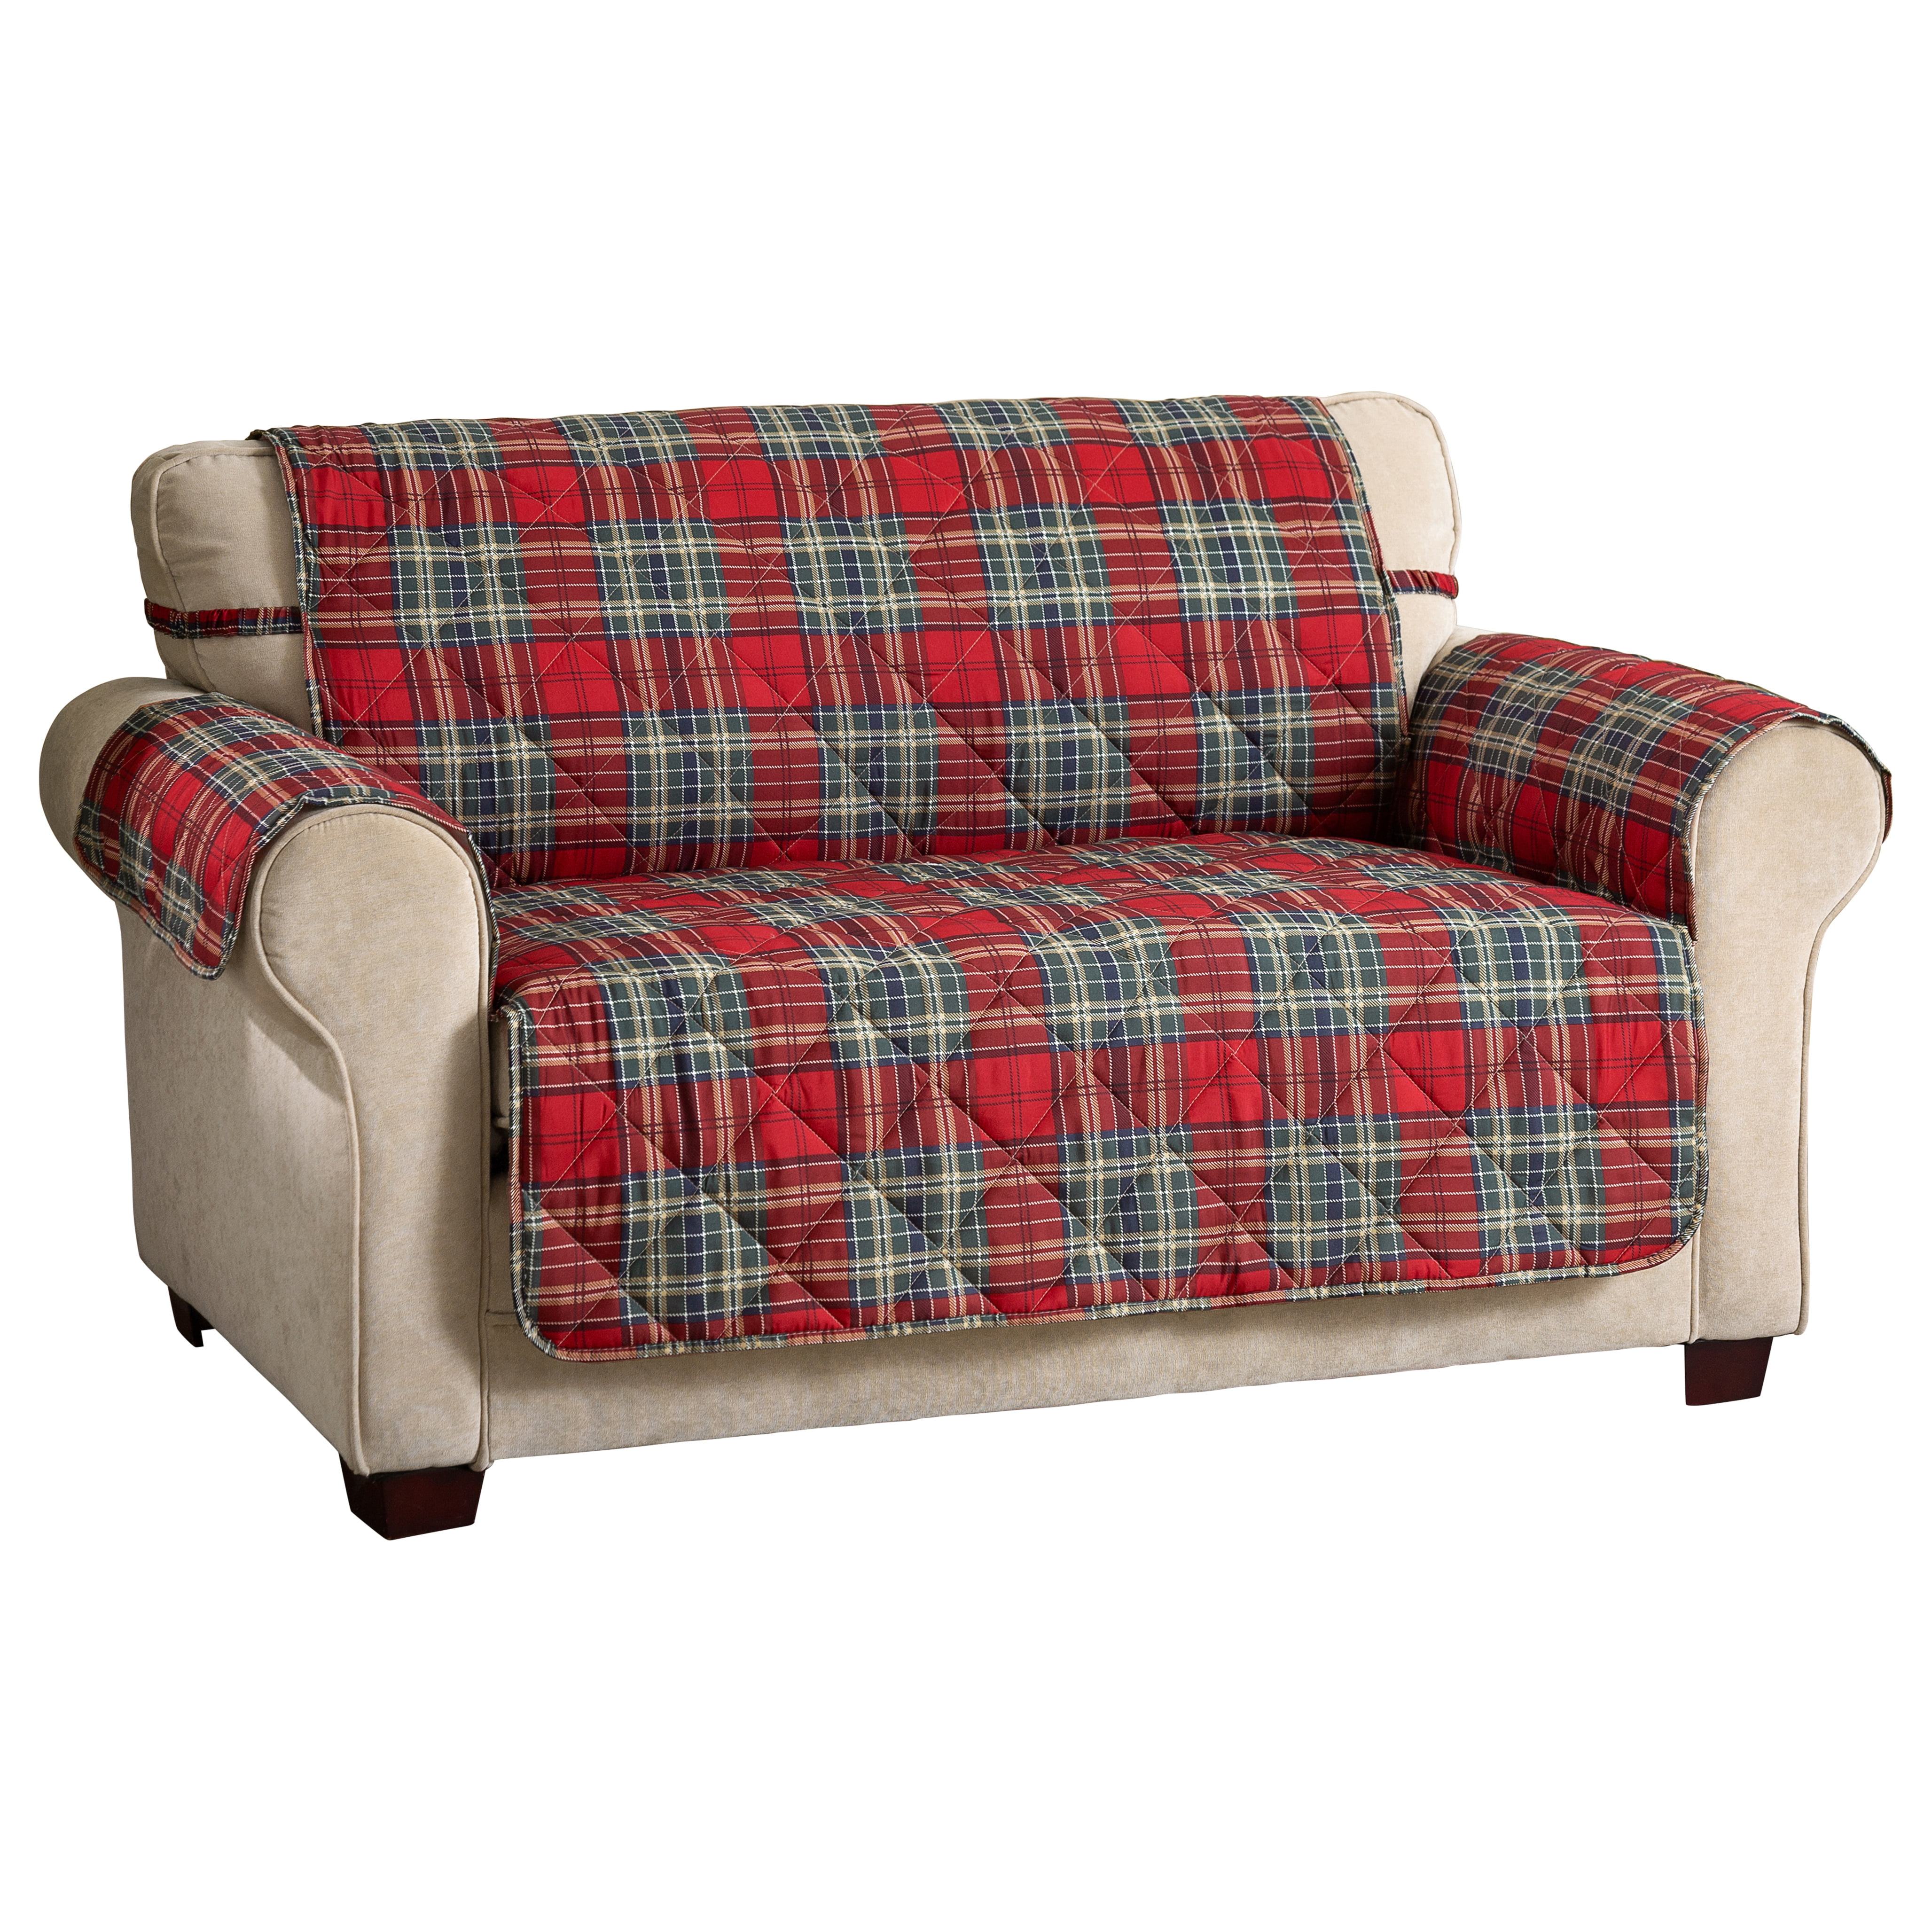 Innovative Textile Solutions Polyester Tartan Plaid Secure Fit Sofa Cover,  Natural, 1-Piece 